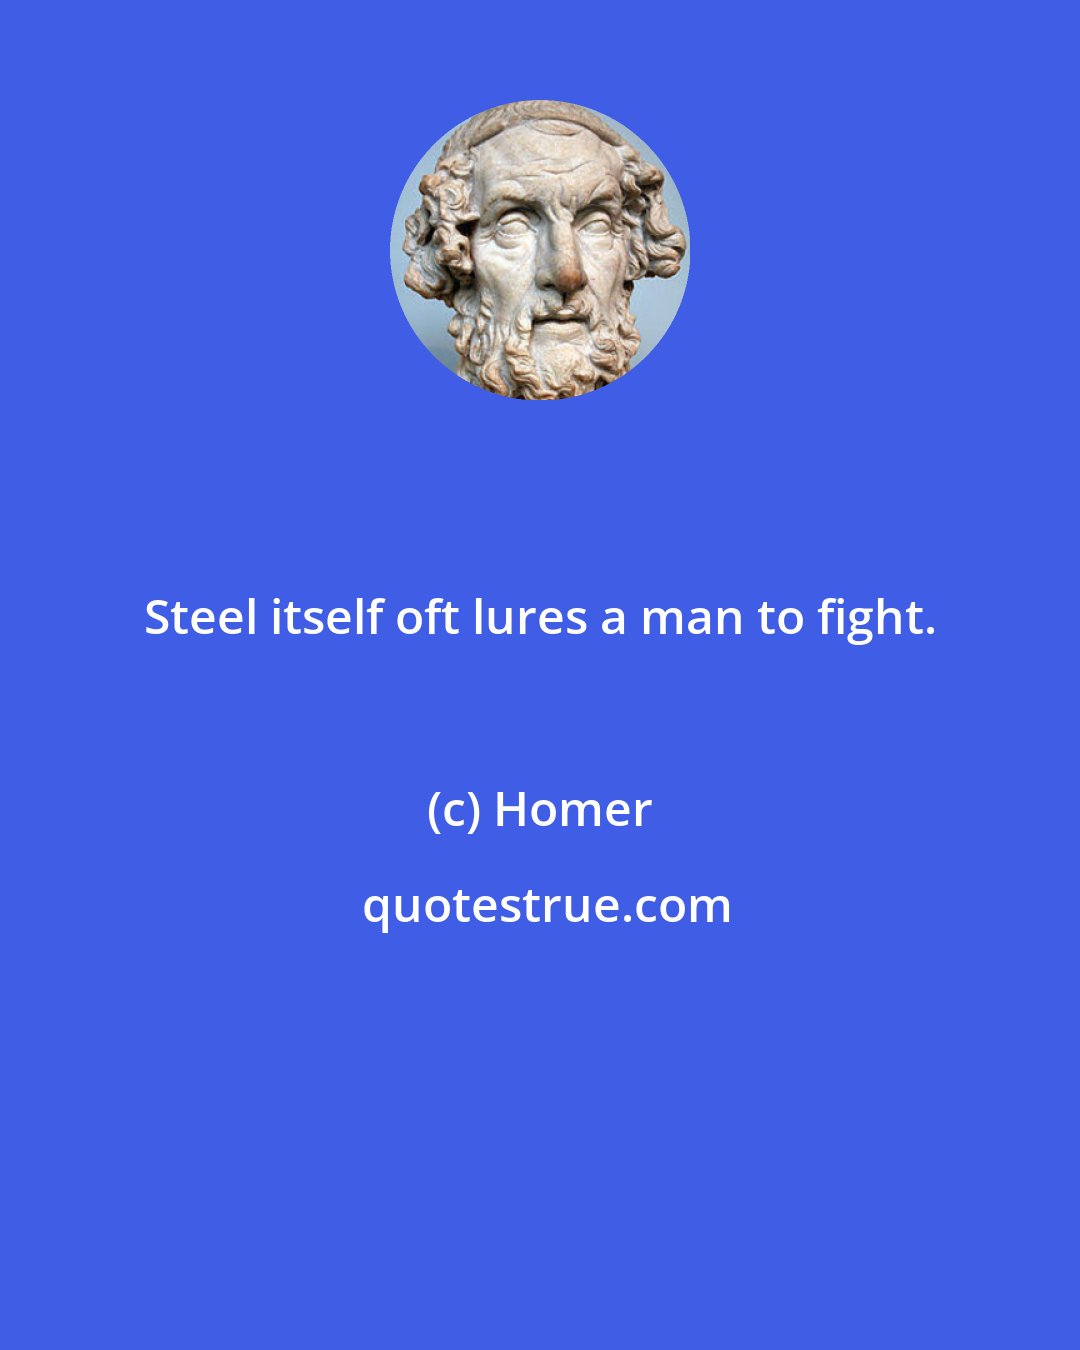 Homer: Steel itself oft lures a man to fight.